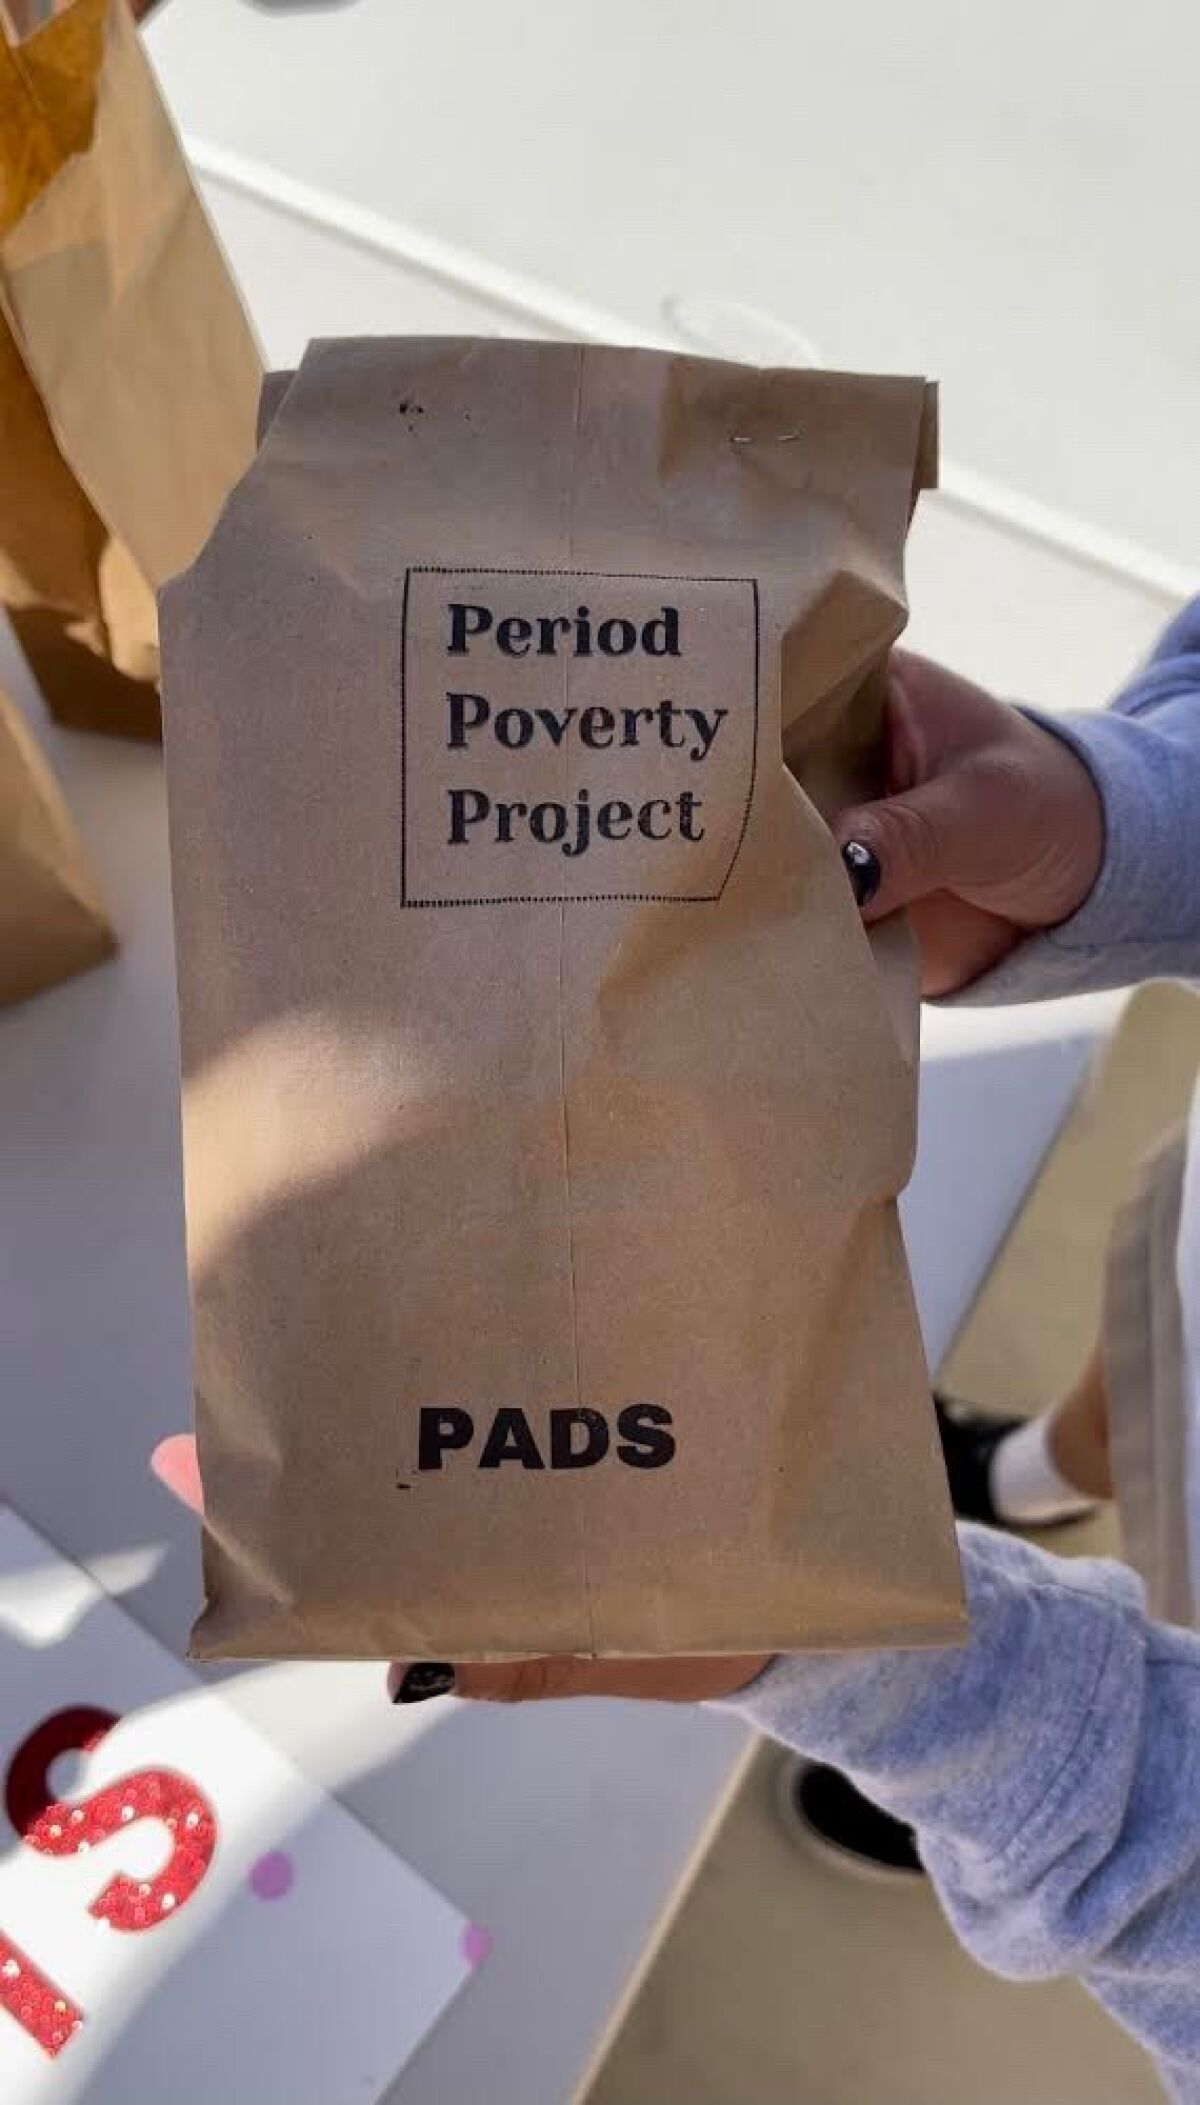 The Period Poverty Project will host an event Nov. 12 to box 80,000 menstrual products into individual packs.